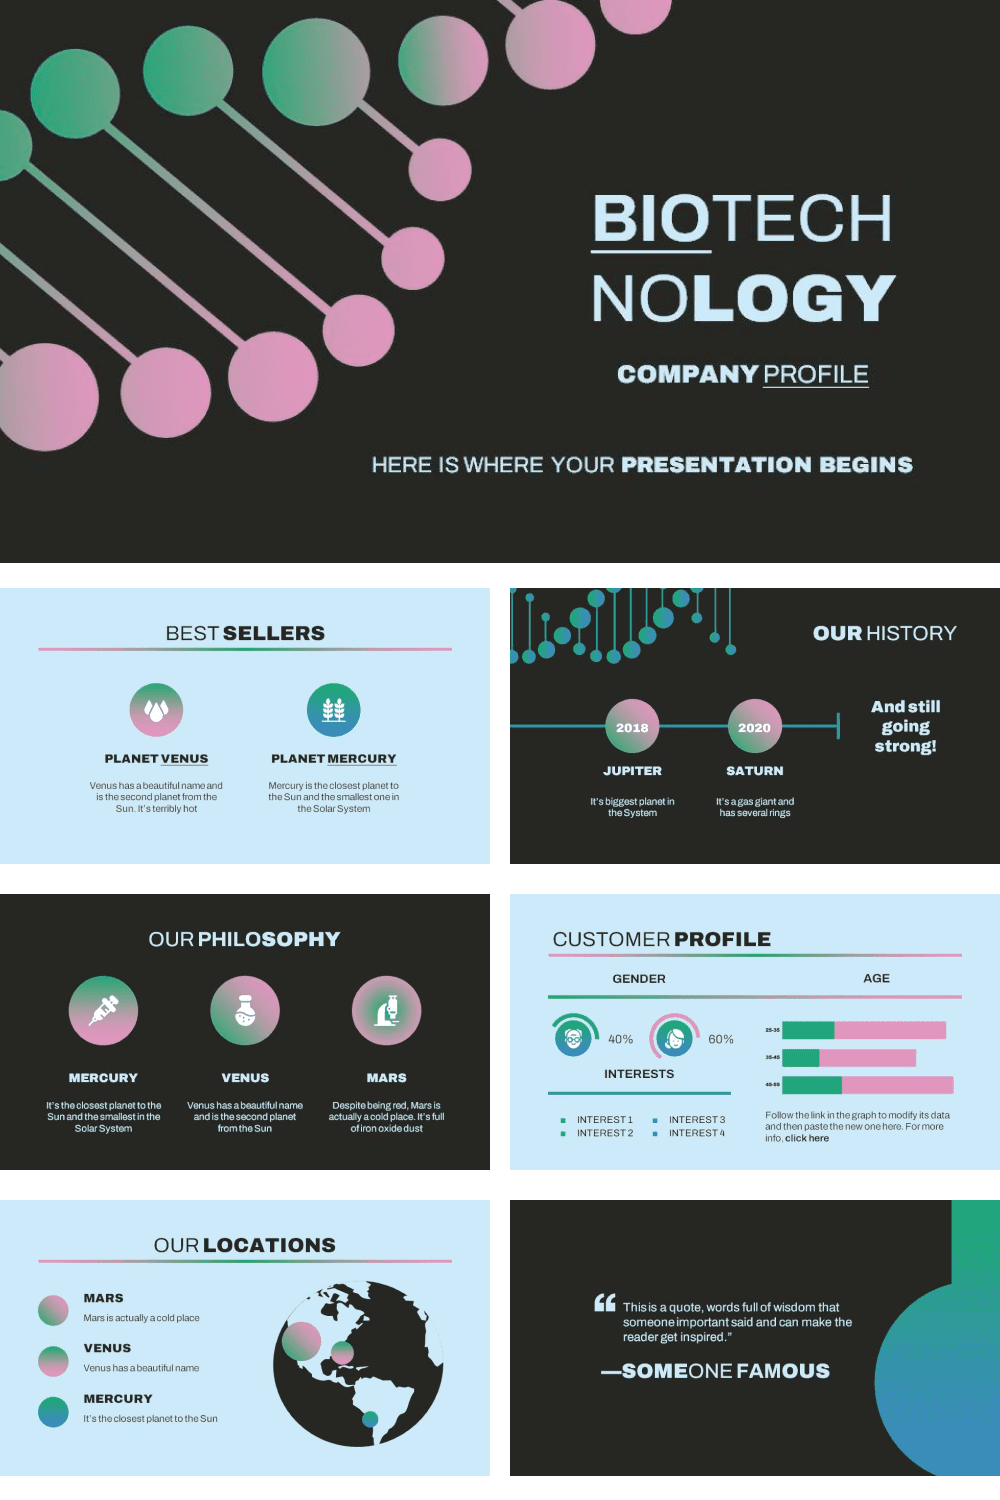 Preview image Biotechnology Company Profile Presentation template.